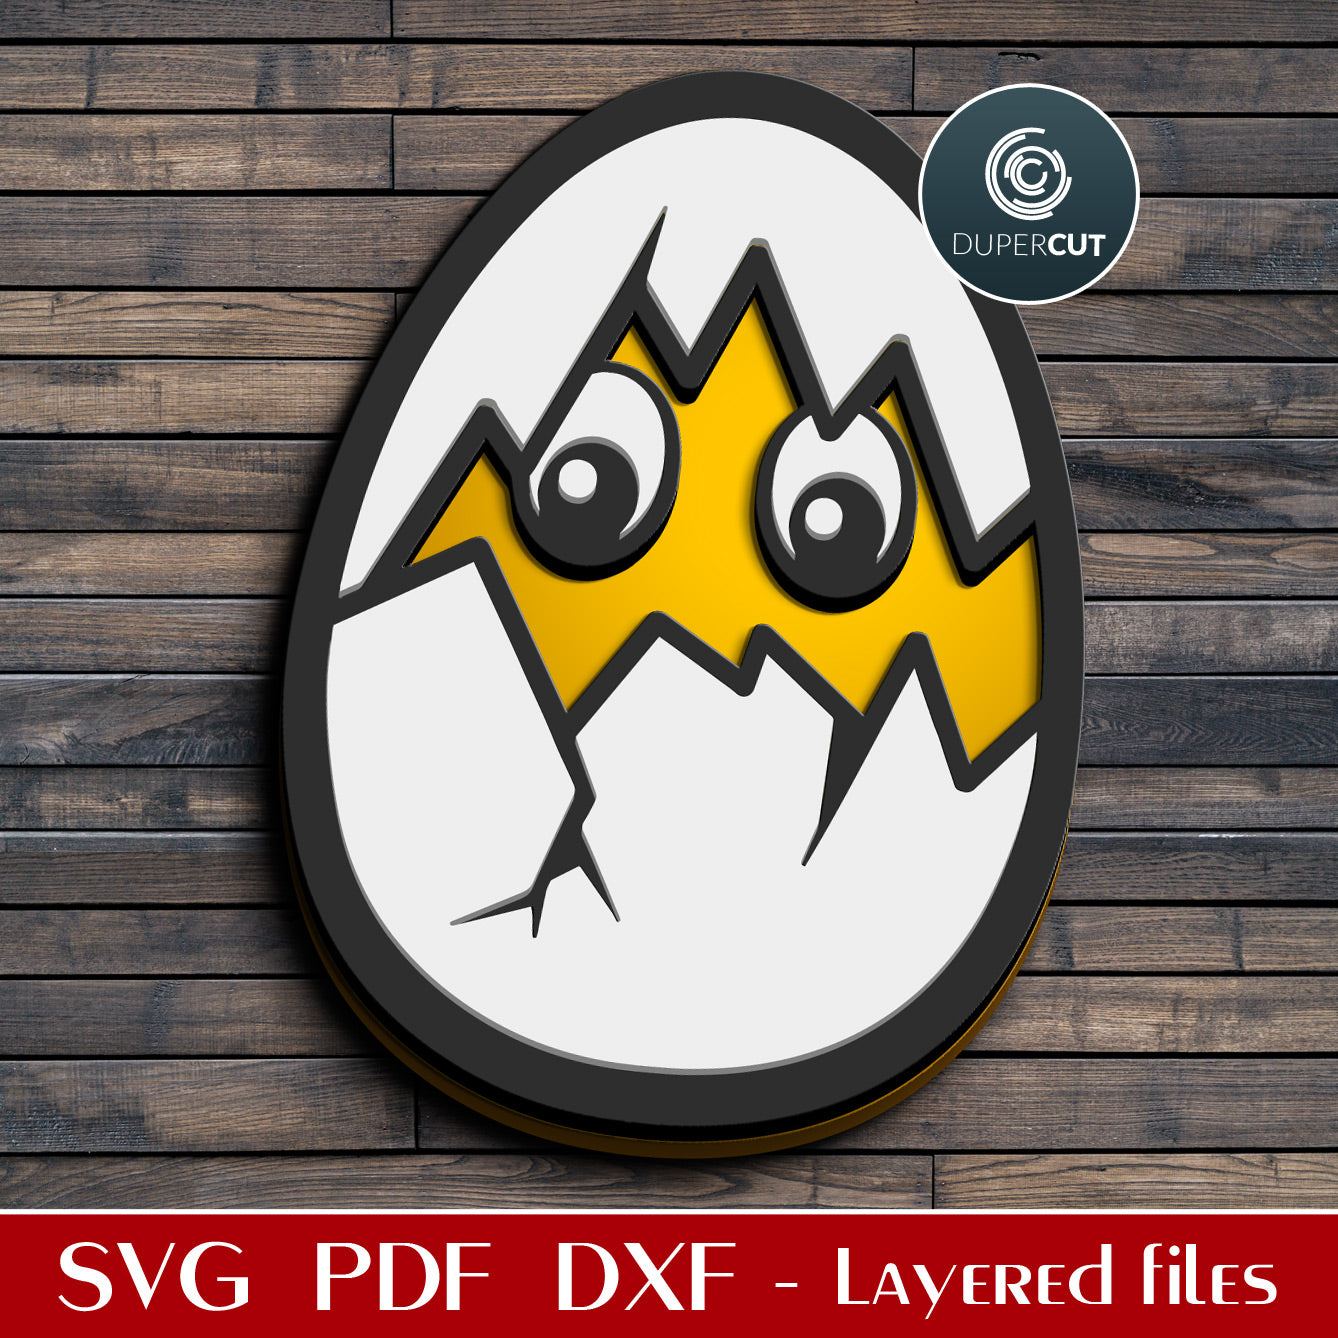 Easter egg chicken cutting template for beginners  - SVG DXF layered laser cutting pattern files for Glowforge, Silhouette Cameo, CNC plasma machines by DuperCut.com